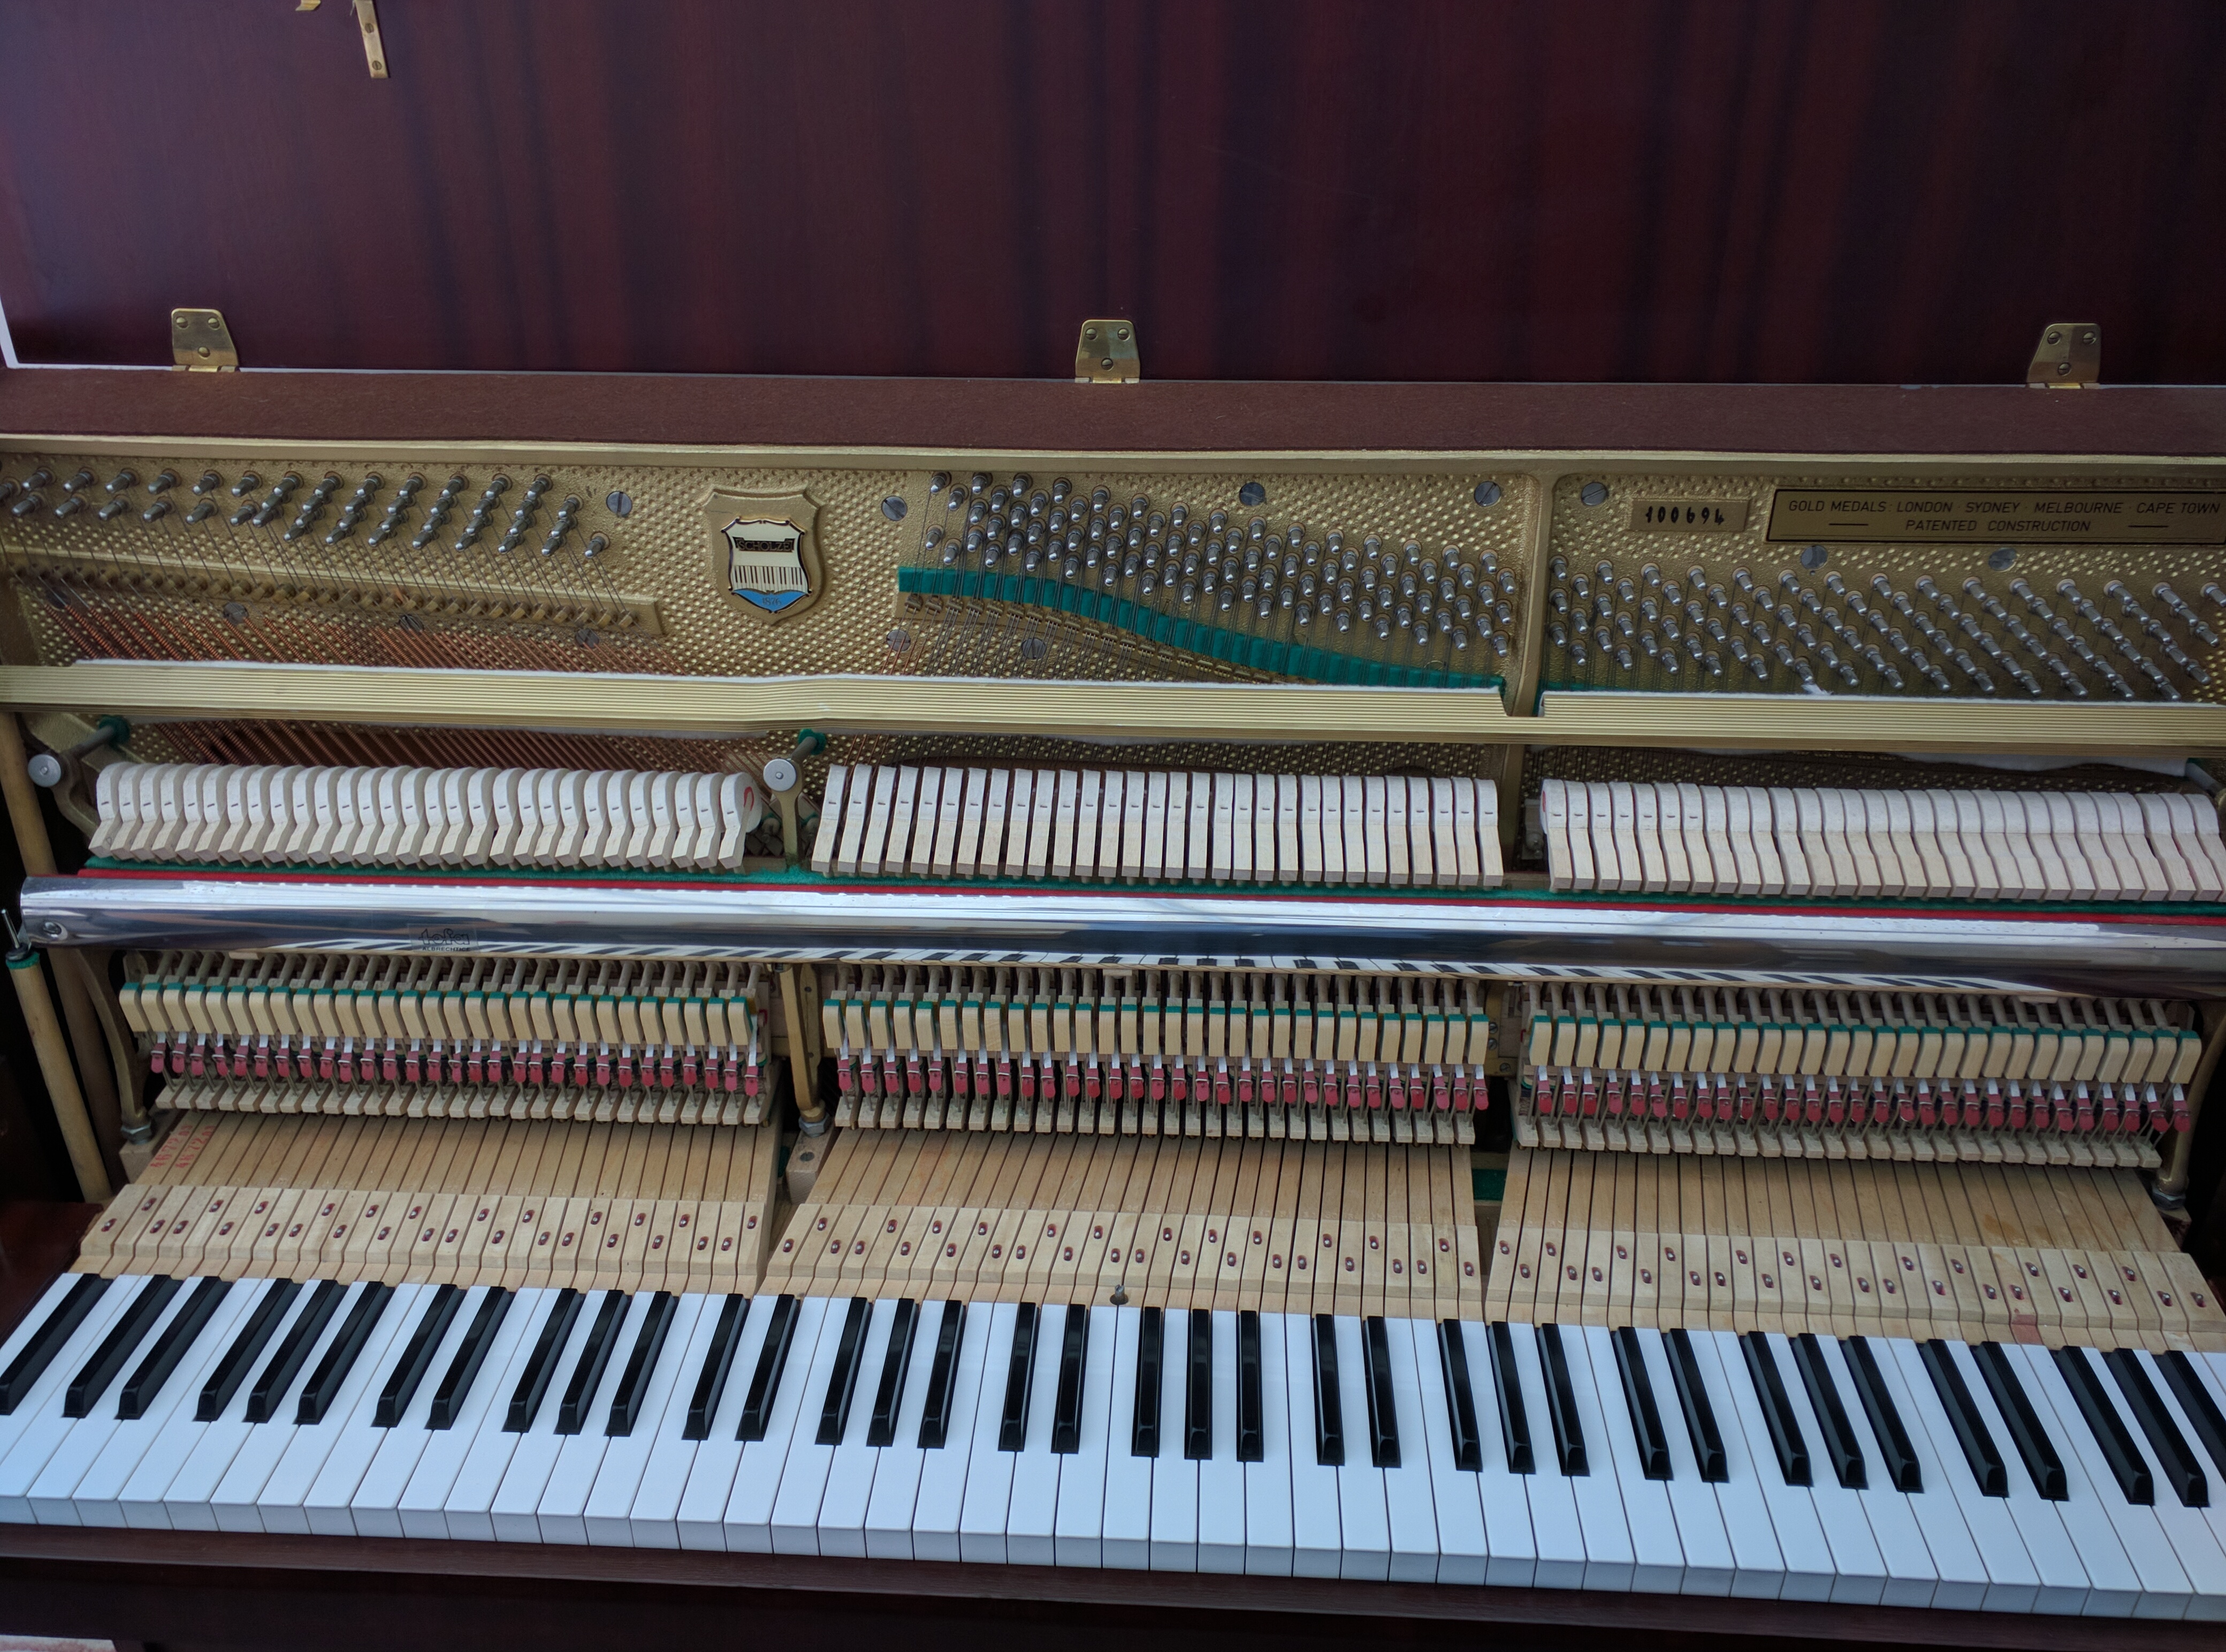 Inside View of the Scholze Upright Piano